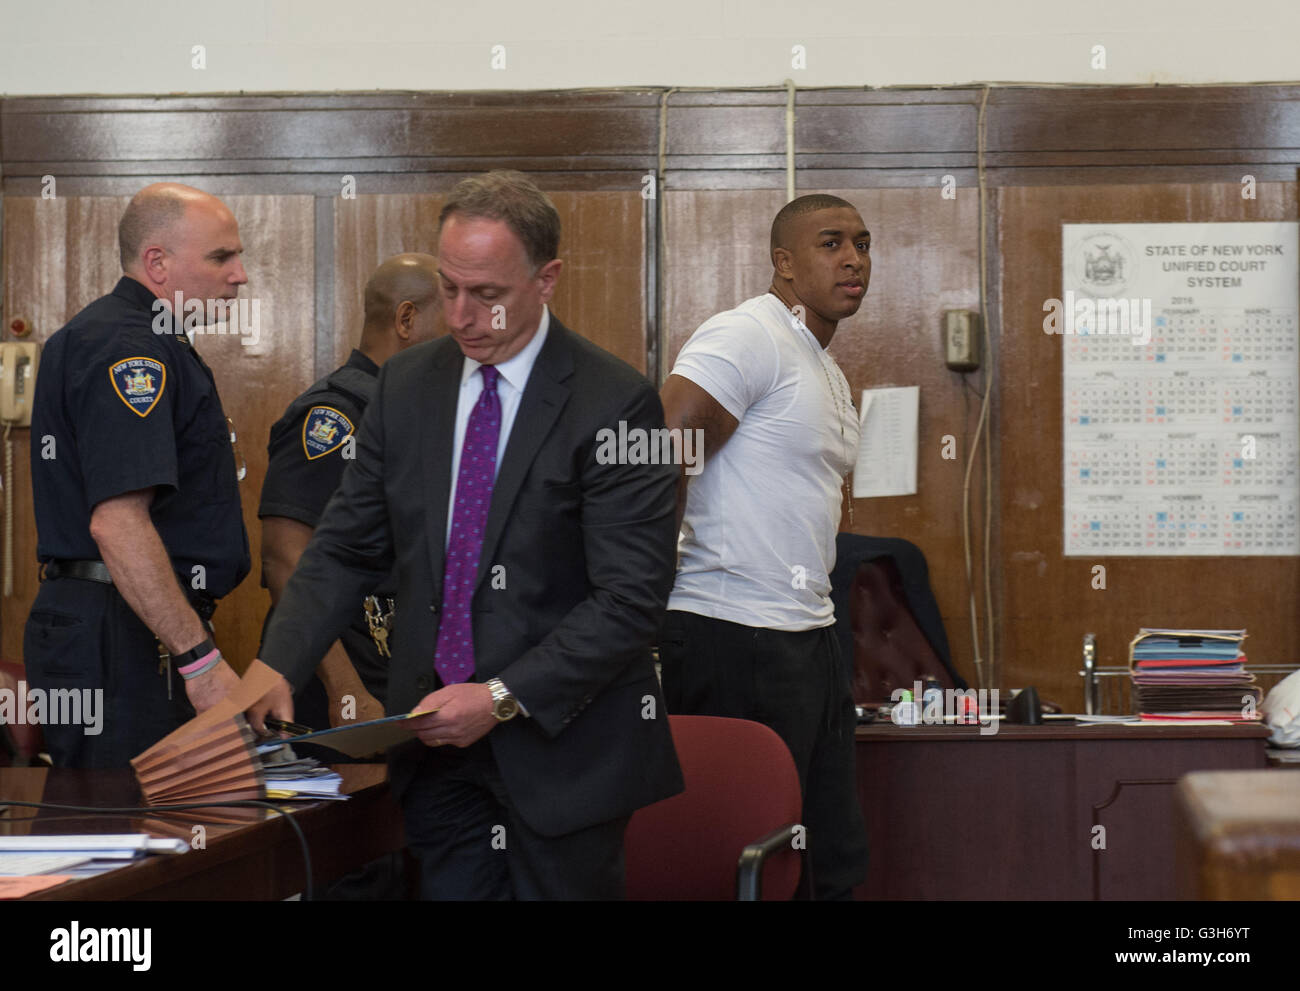 New York, NY, USA. 24th June, 2016. TAYLONN MURPHY is removed from the